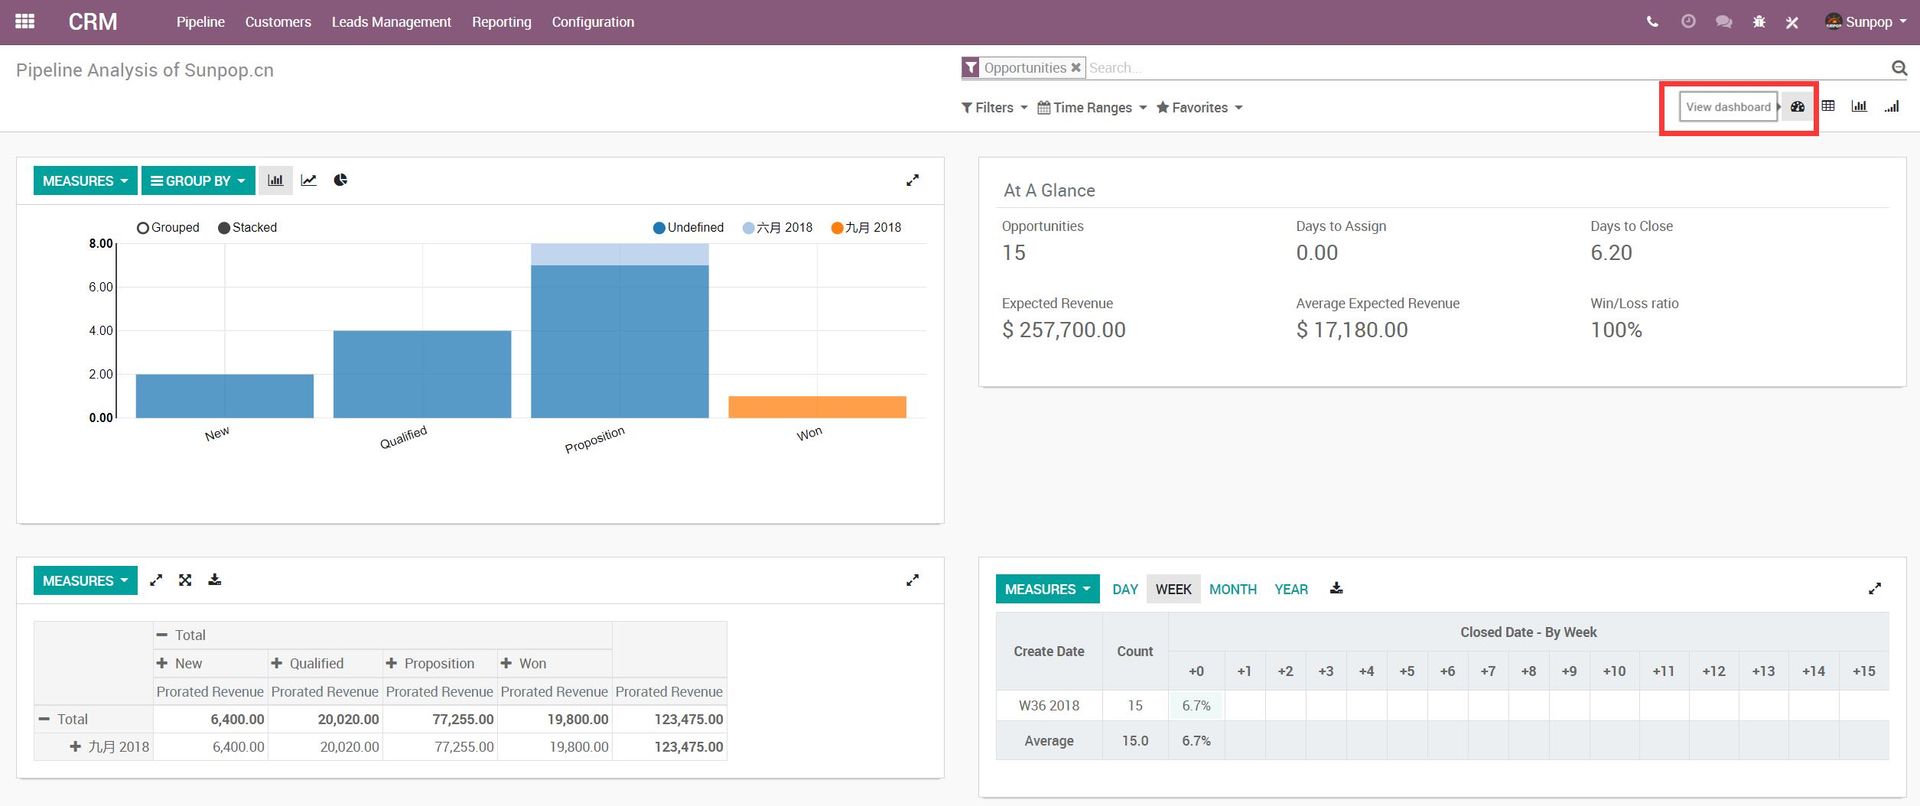 Odoo 12 New Features, enhance and boost from 11。 odoo12新特性，功能更多，性能更好